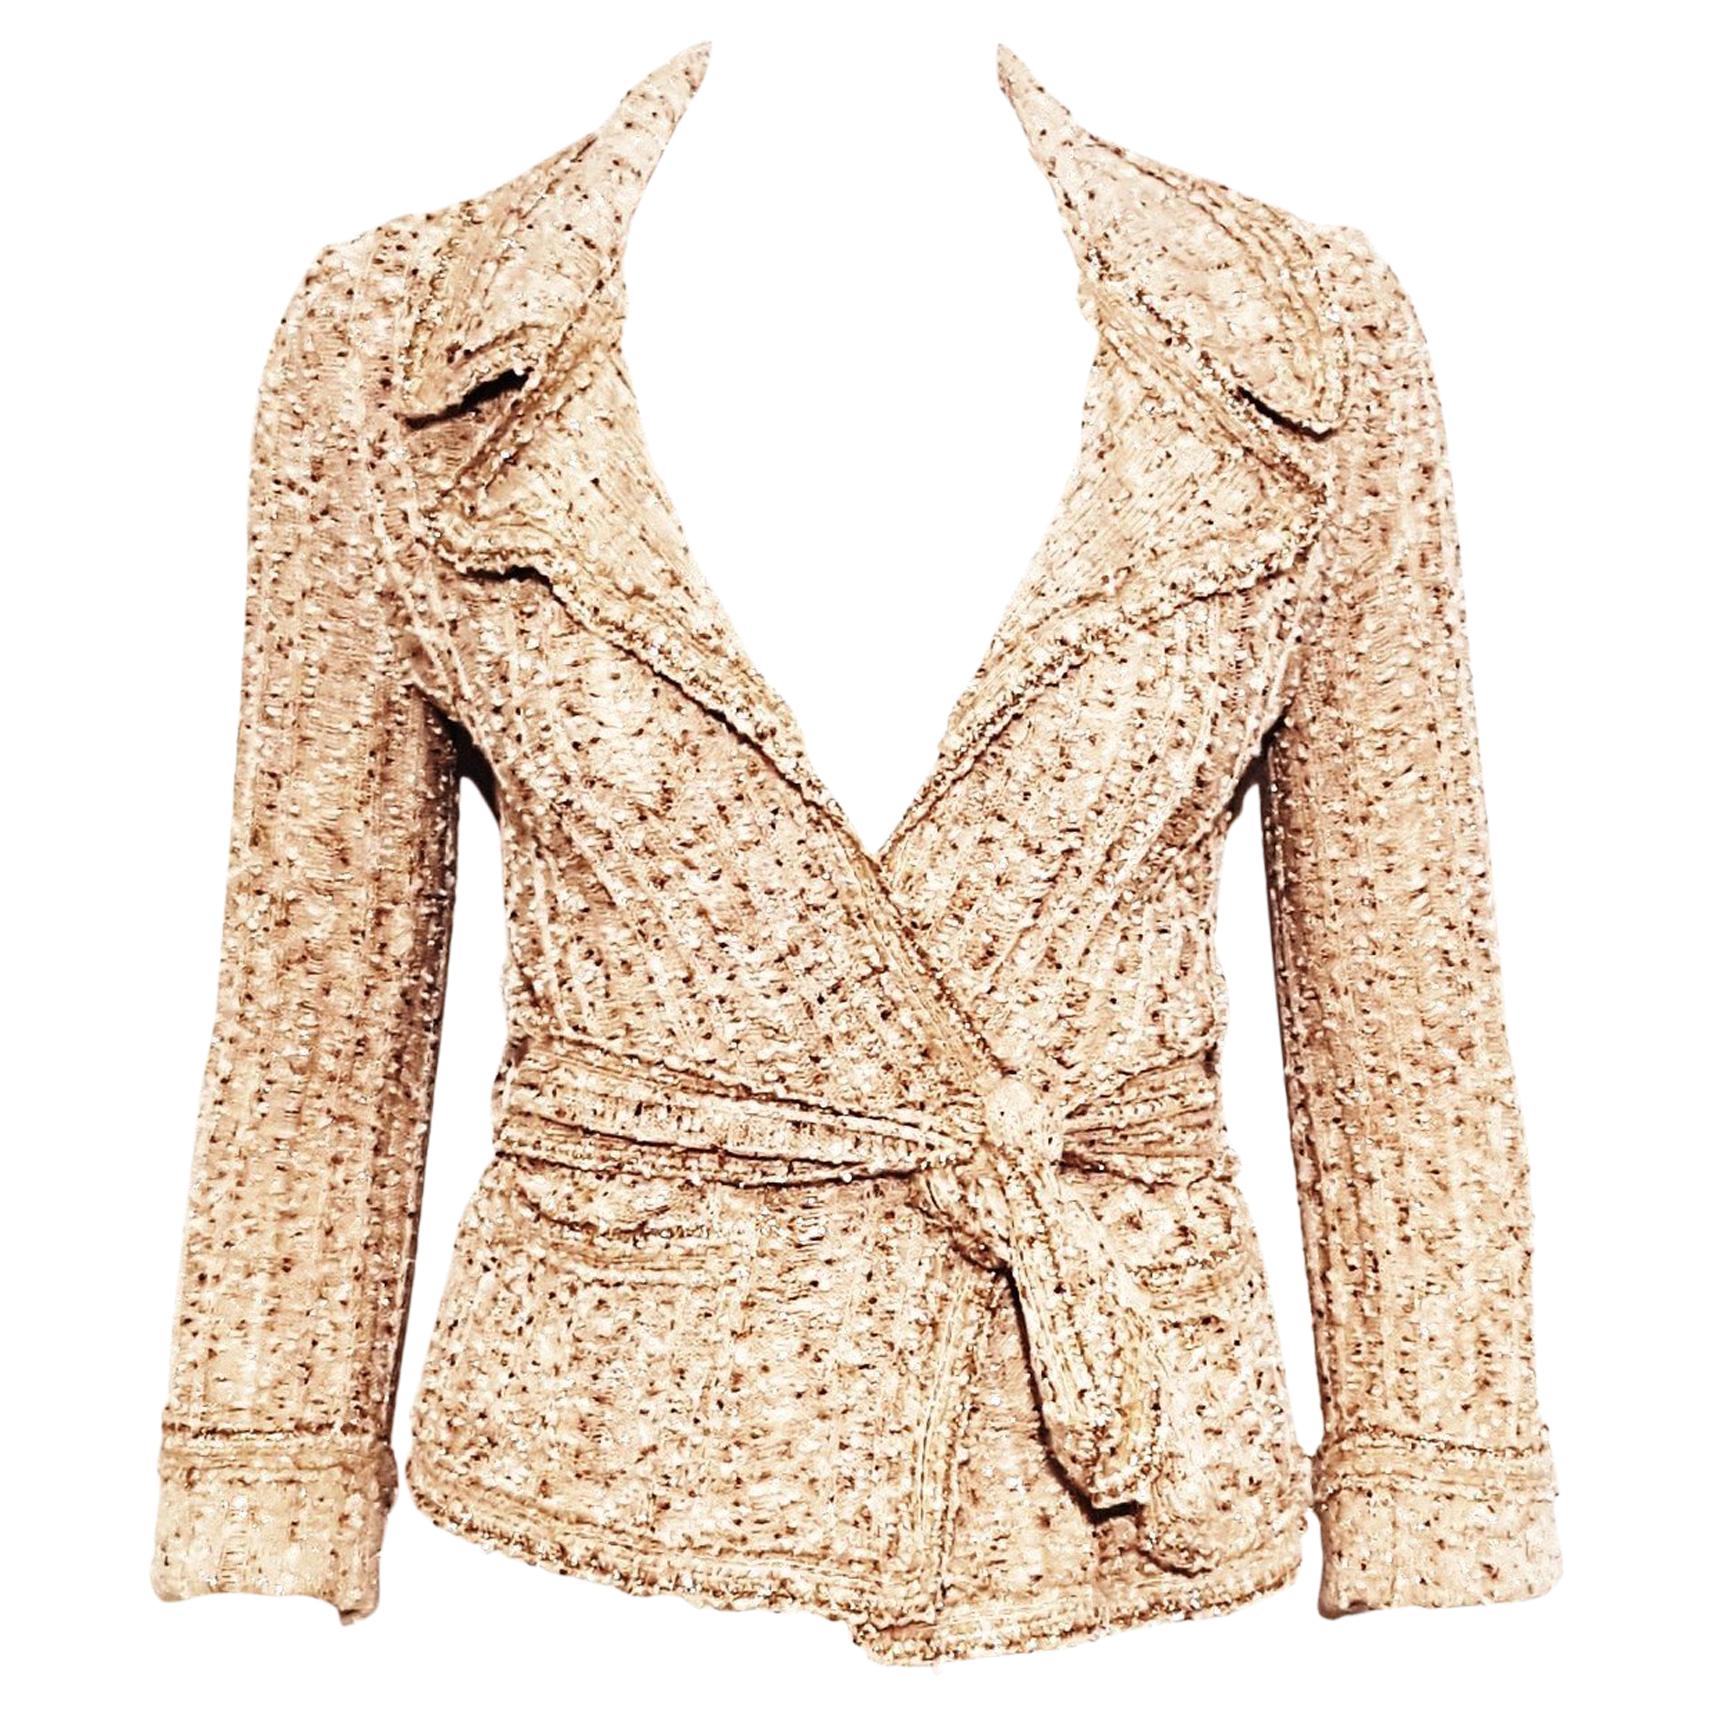 Chanel Beige, Copper & Gold Tone Cotton Blend Knit Sweater Jacket from Spring 06